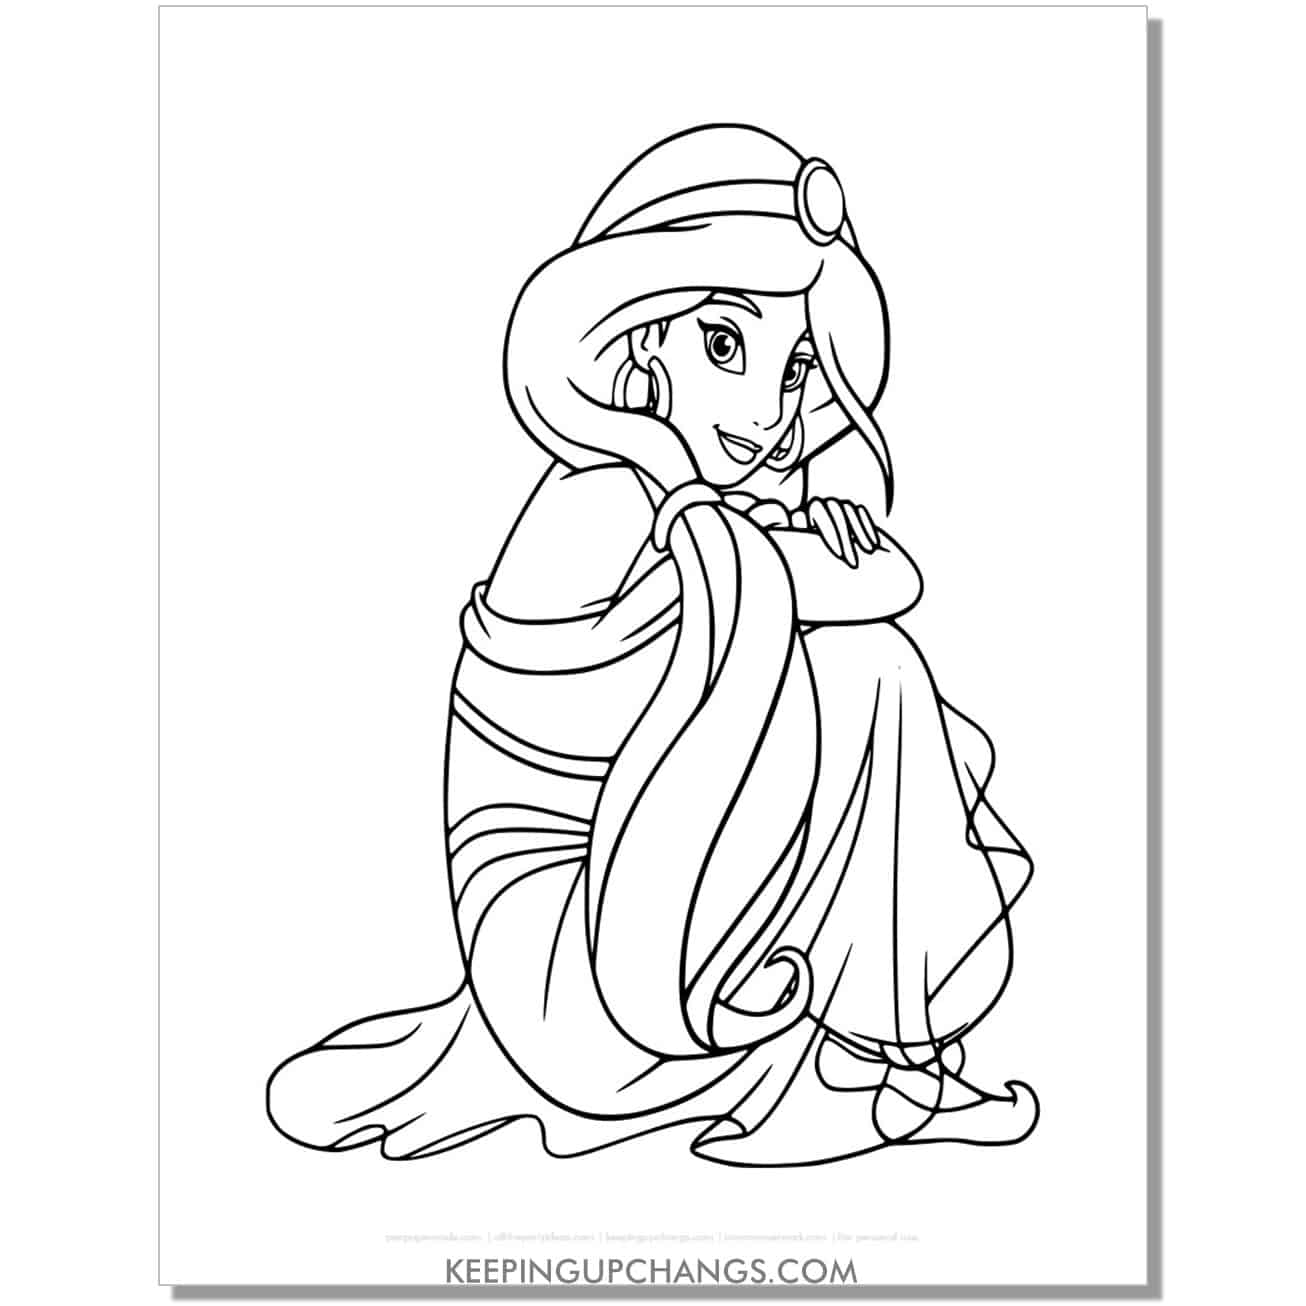 jasmine sitting with arms on knees coloring page, sheet.